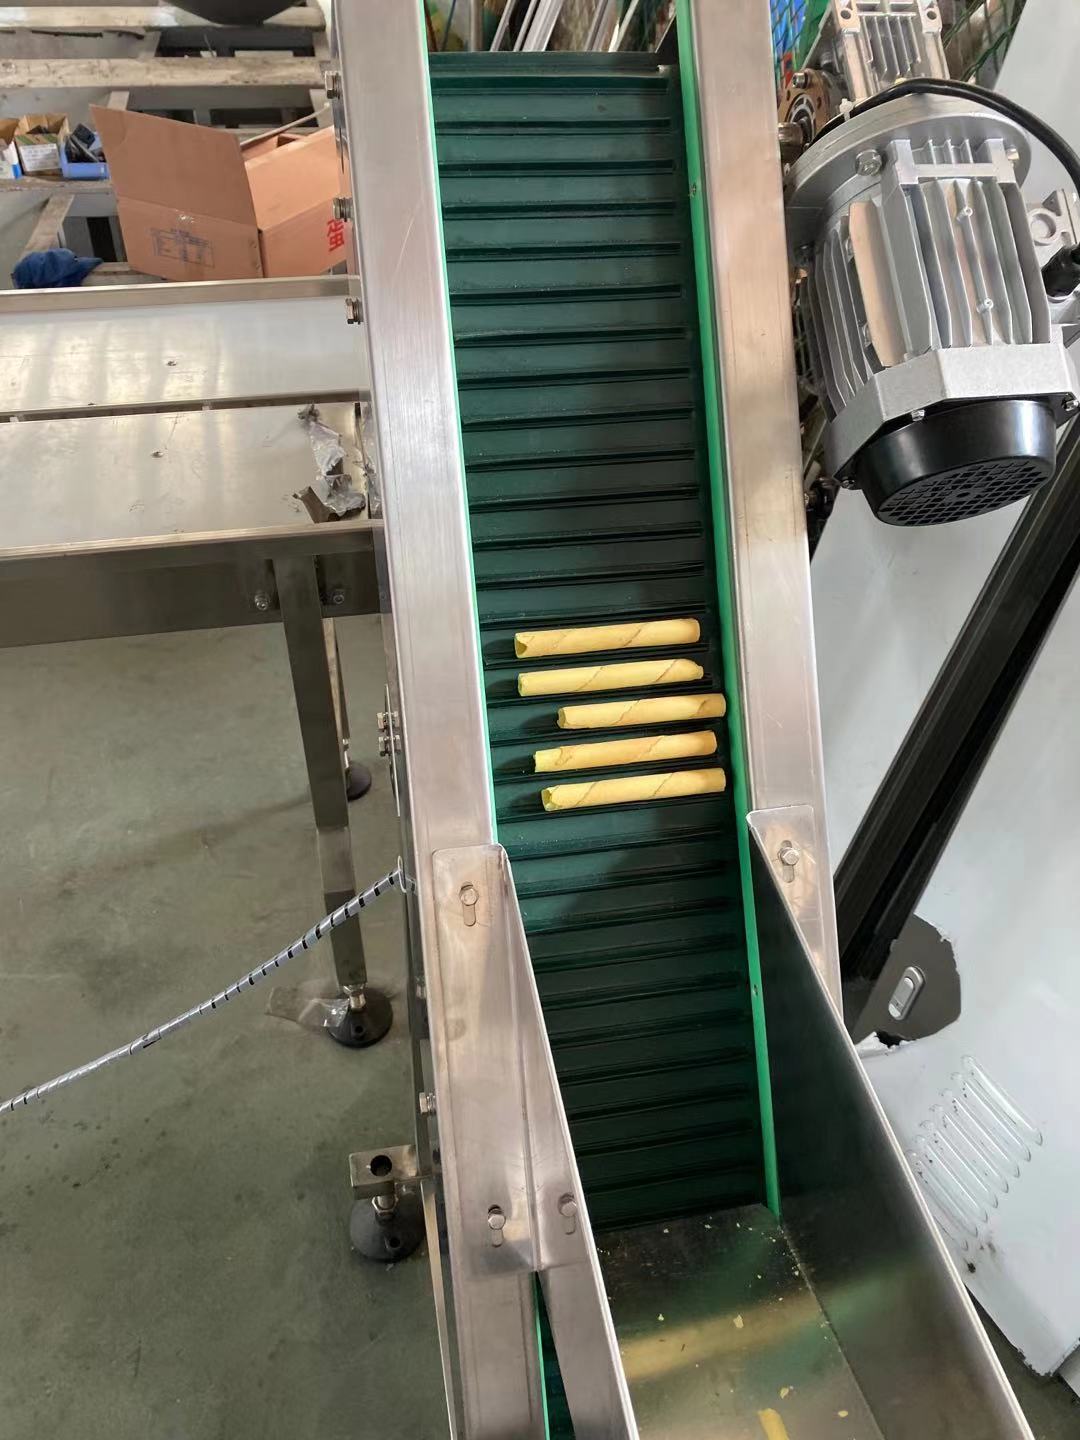 Swiss Roll Egg Roll Wafer Roll Wrapping Packaging machine